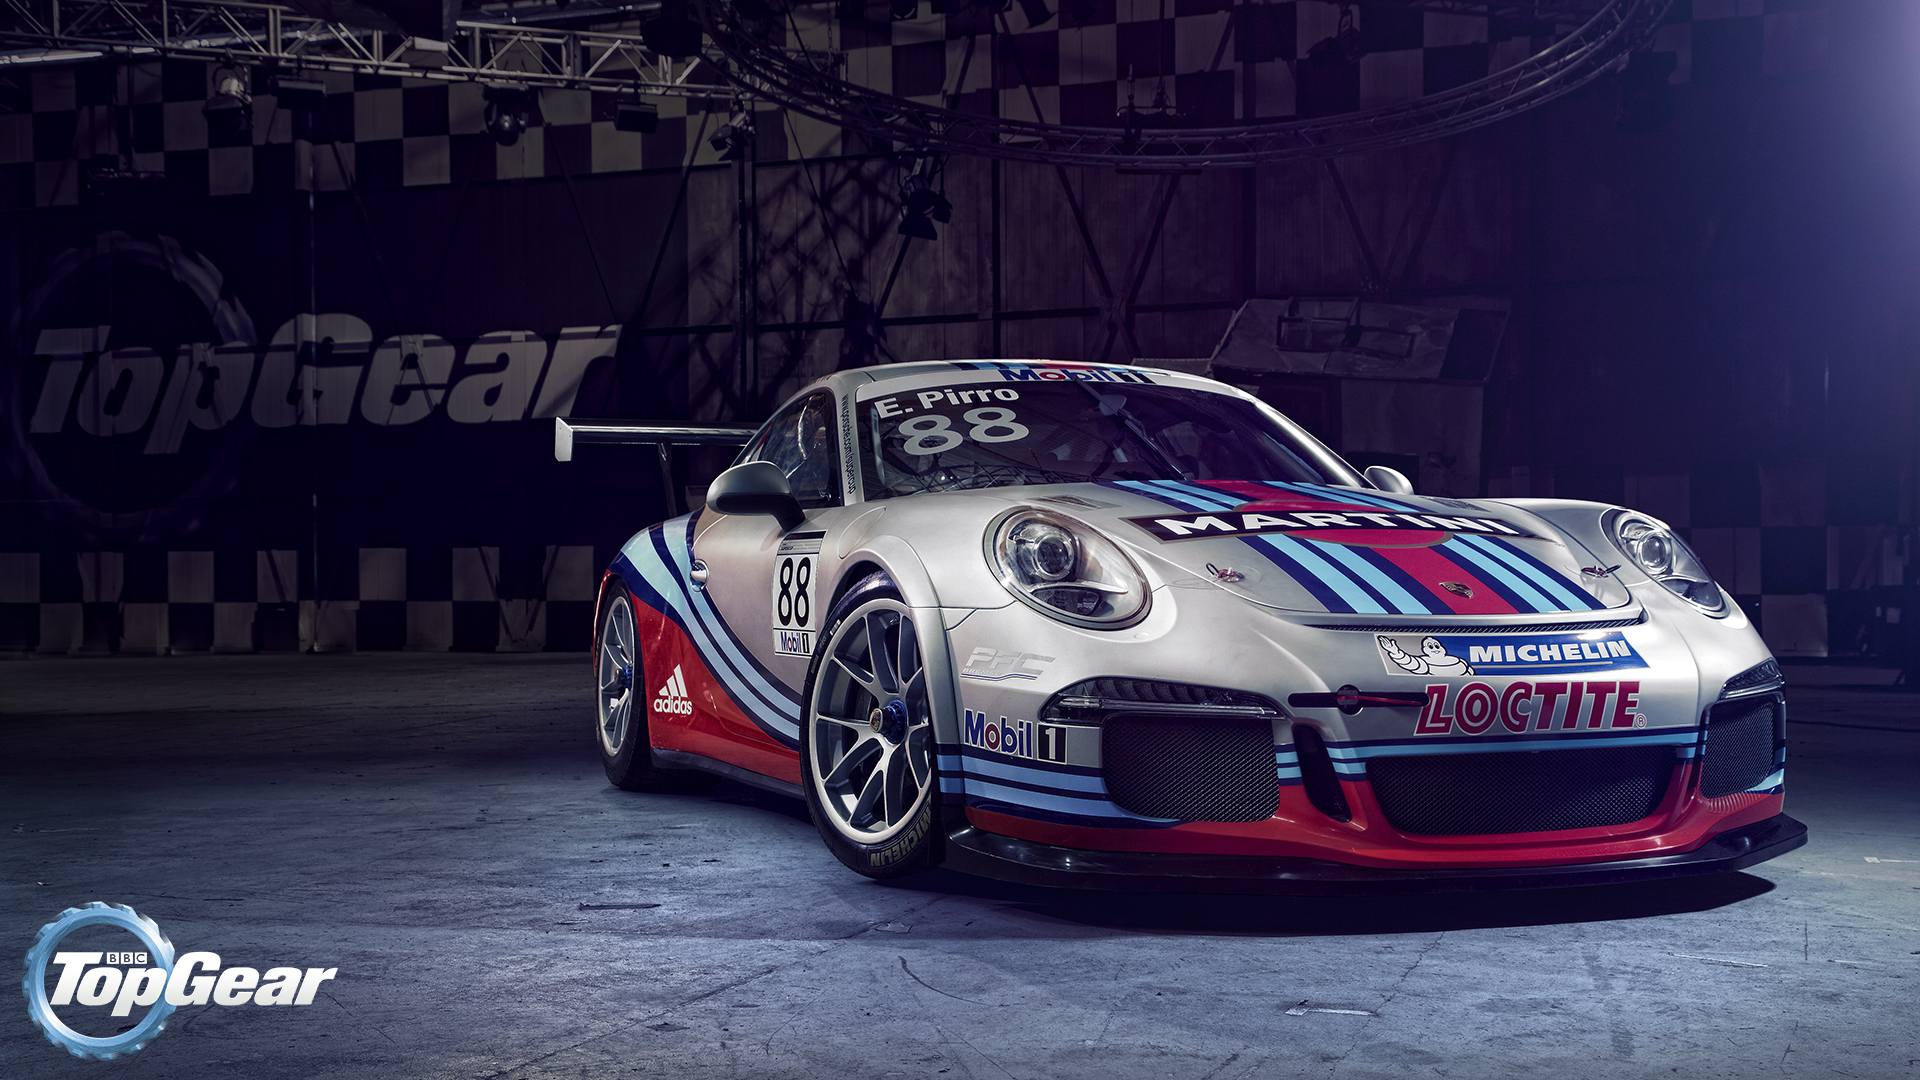 1920x1080 Exclusive wallpapers: Martini race cars